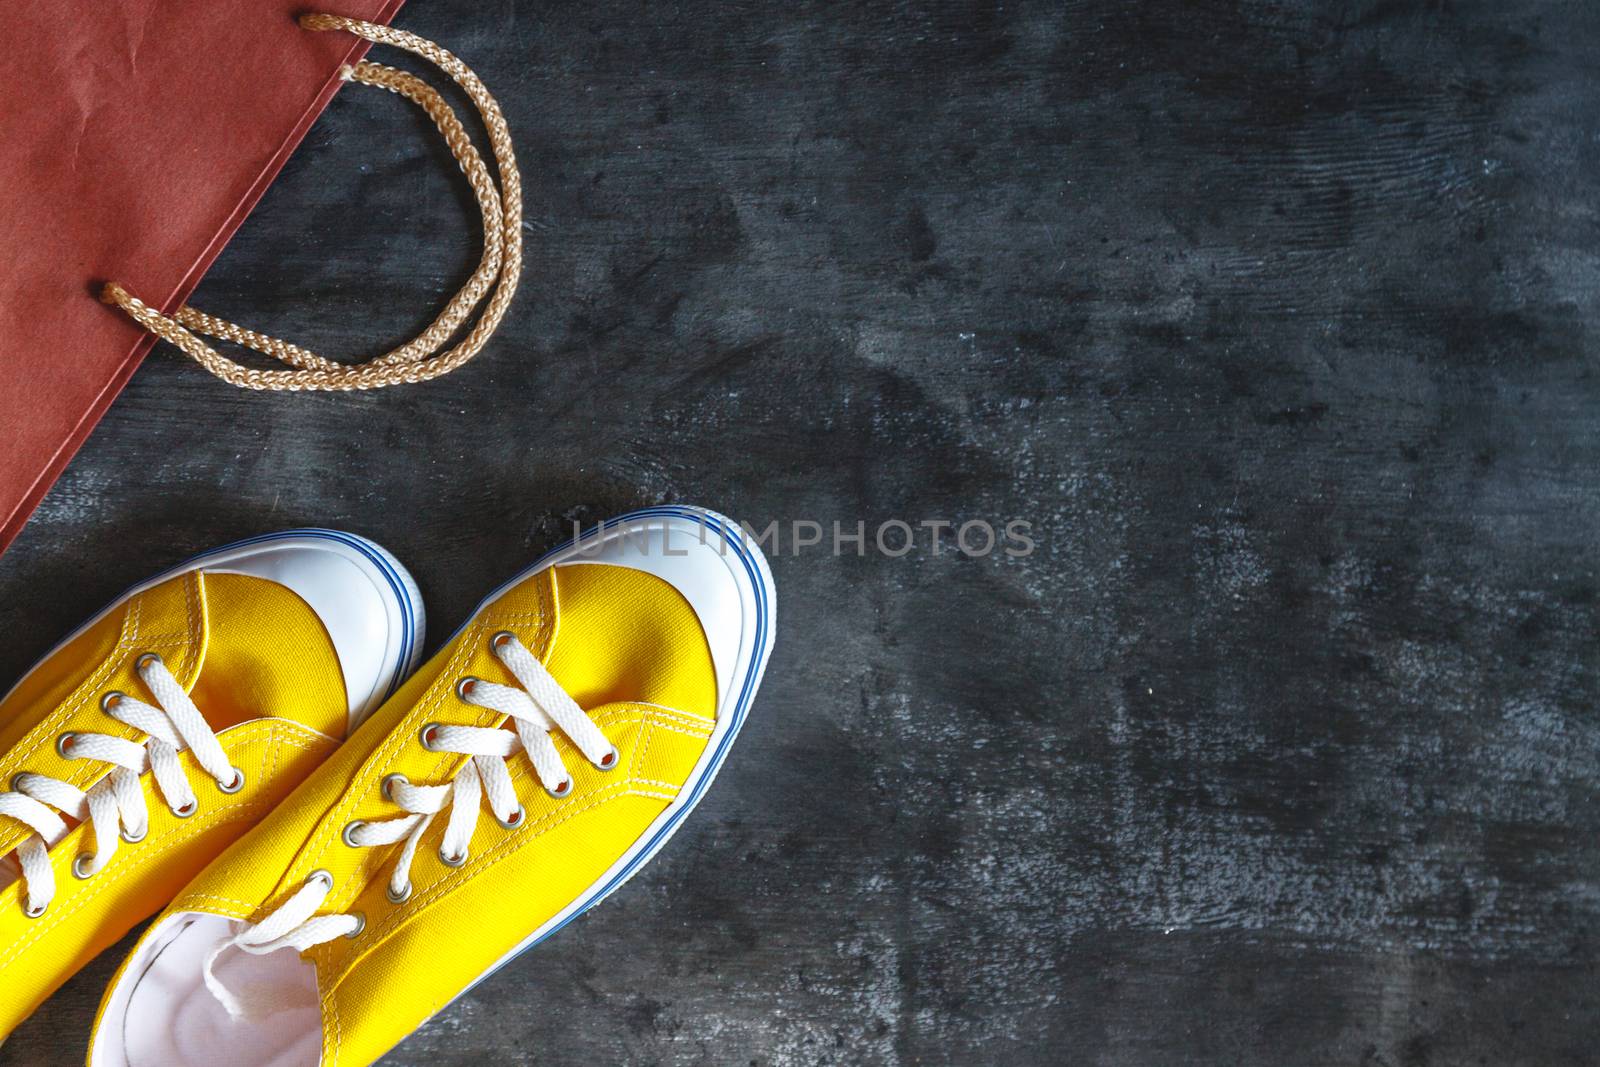 New yellow sneakers, box and package from the store on a dark concrete background. View from above. Copy space.